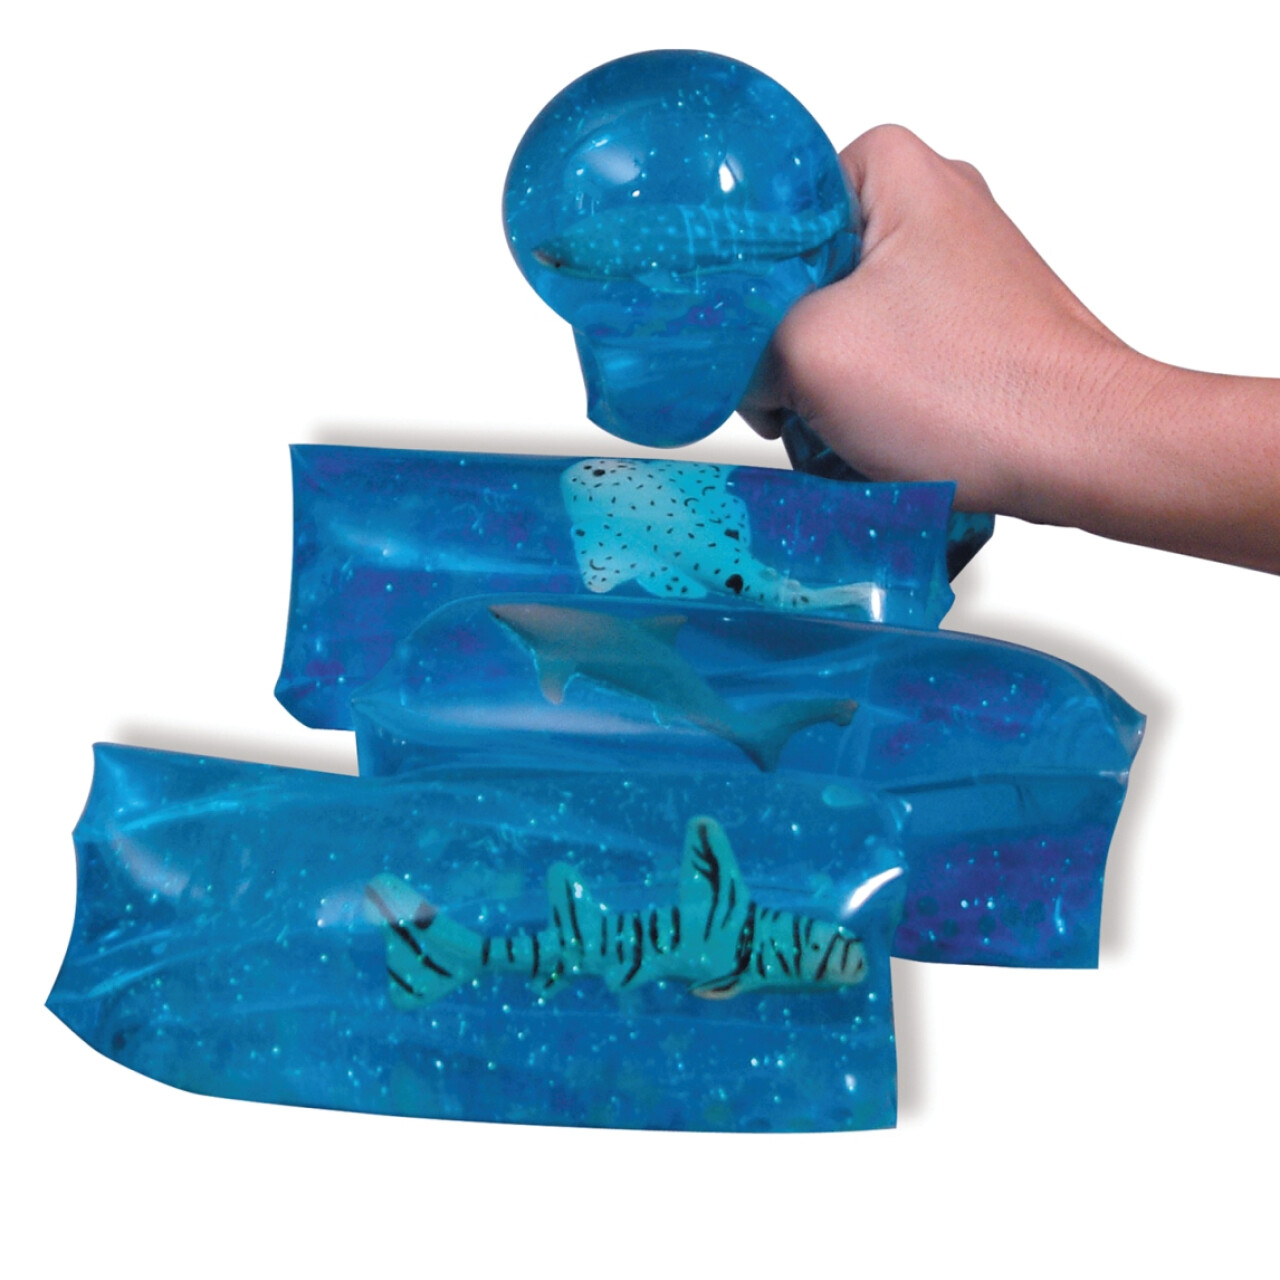 beth pabalan recommends Diy Water Wiggler Toy